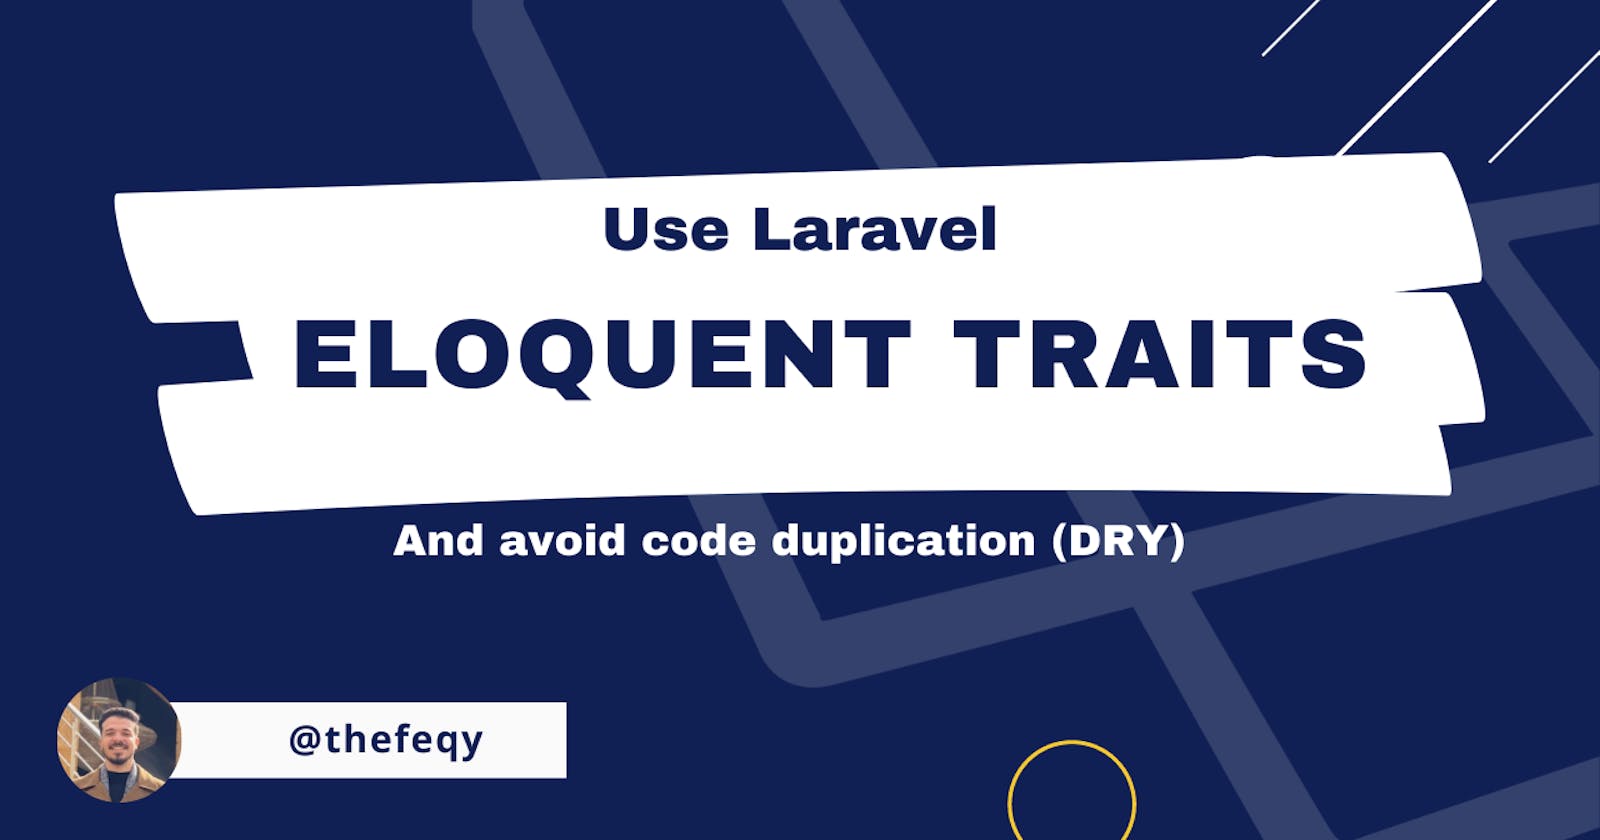 Use laravel's eloquent traits to avoid code duplication